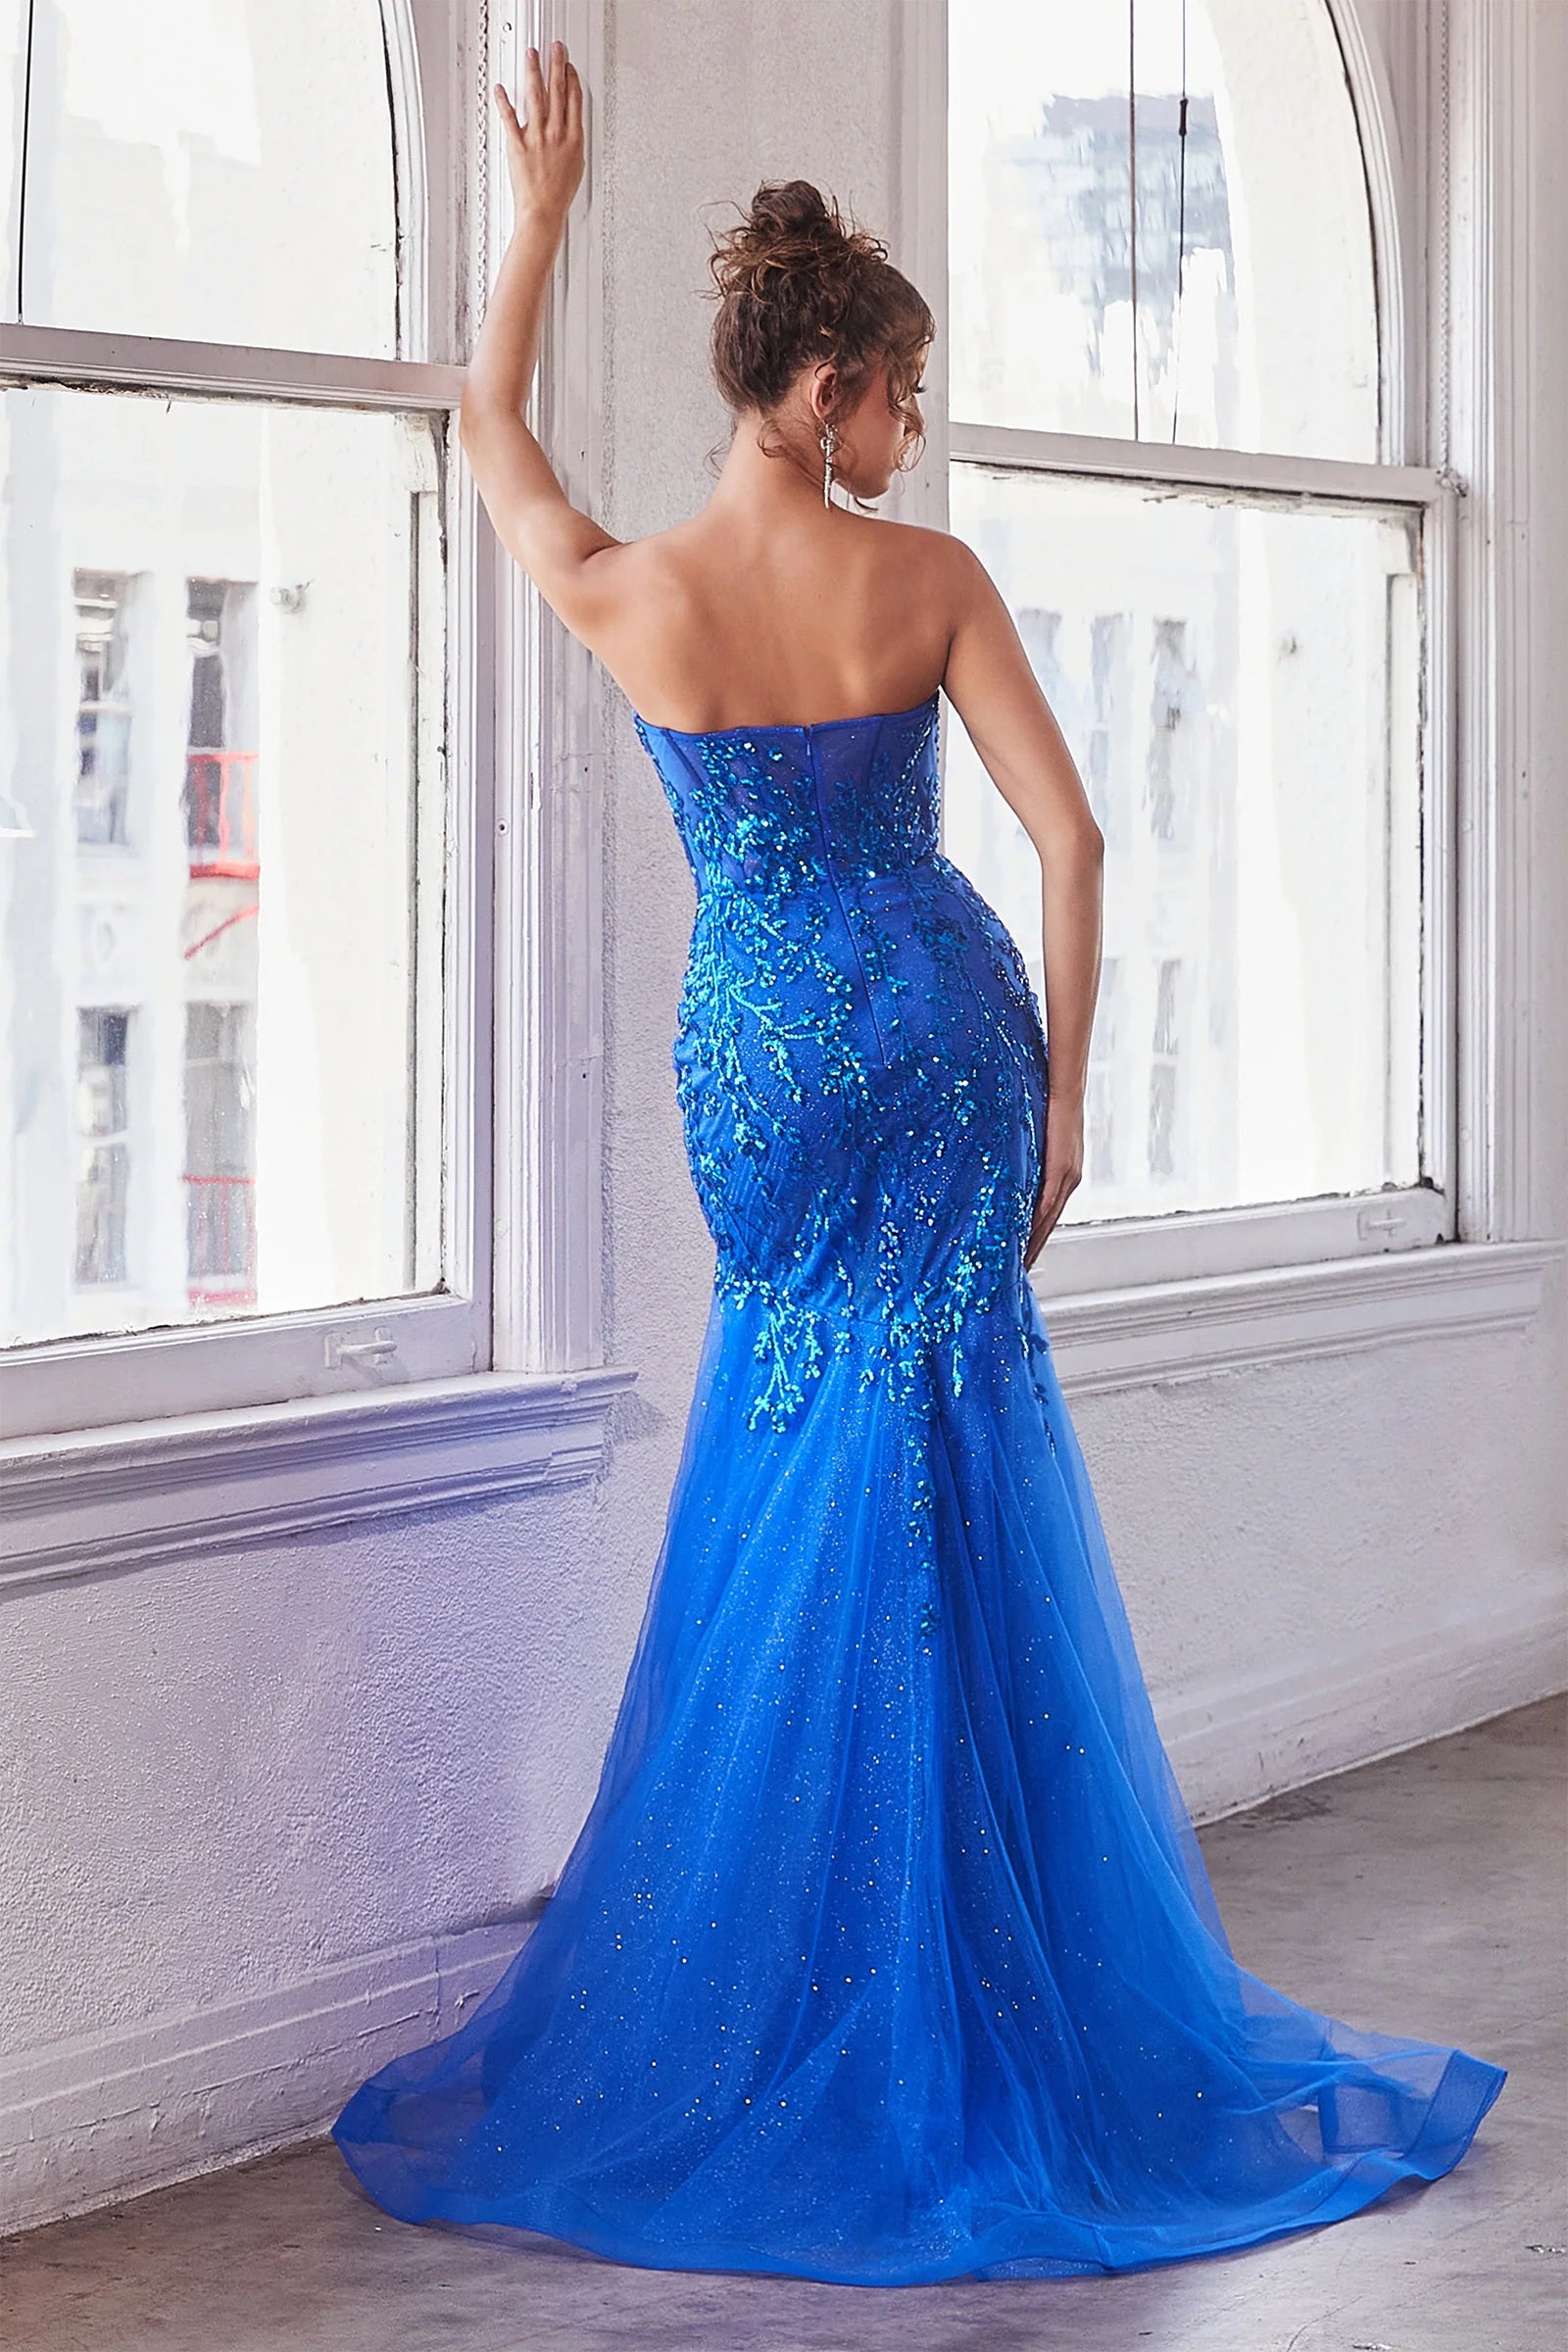 The Ladivine CB139 prom dress boasts a sheer corset bodice that adds a hint of allure to this shimmering dress. The mermaid silhouette and strapless design give a stunning, formal look that will turn heads. Perfect for prom or any special occasion. Look absolutely breathtaking in this beautiful strapless mermaid gown.